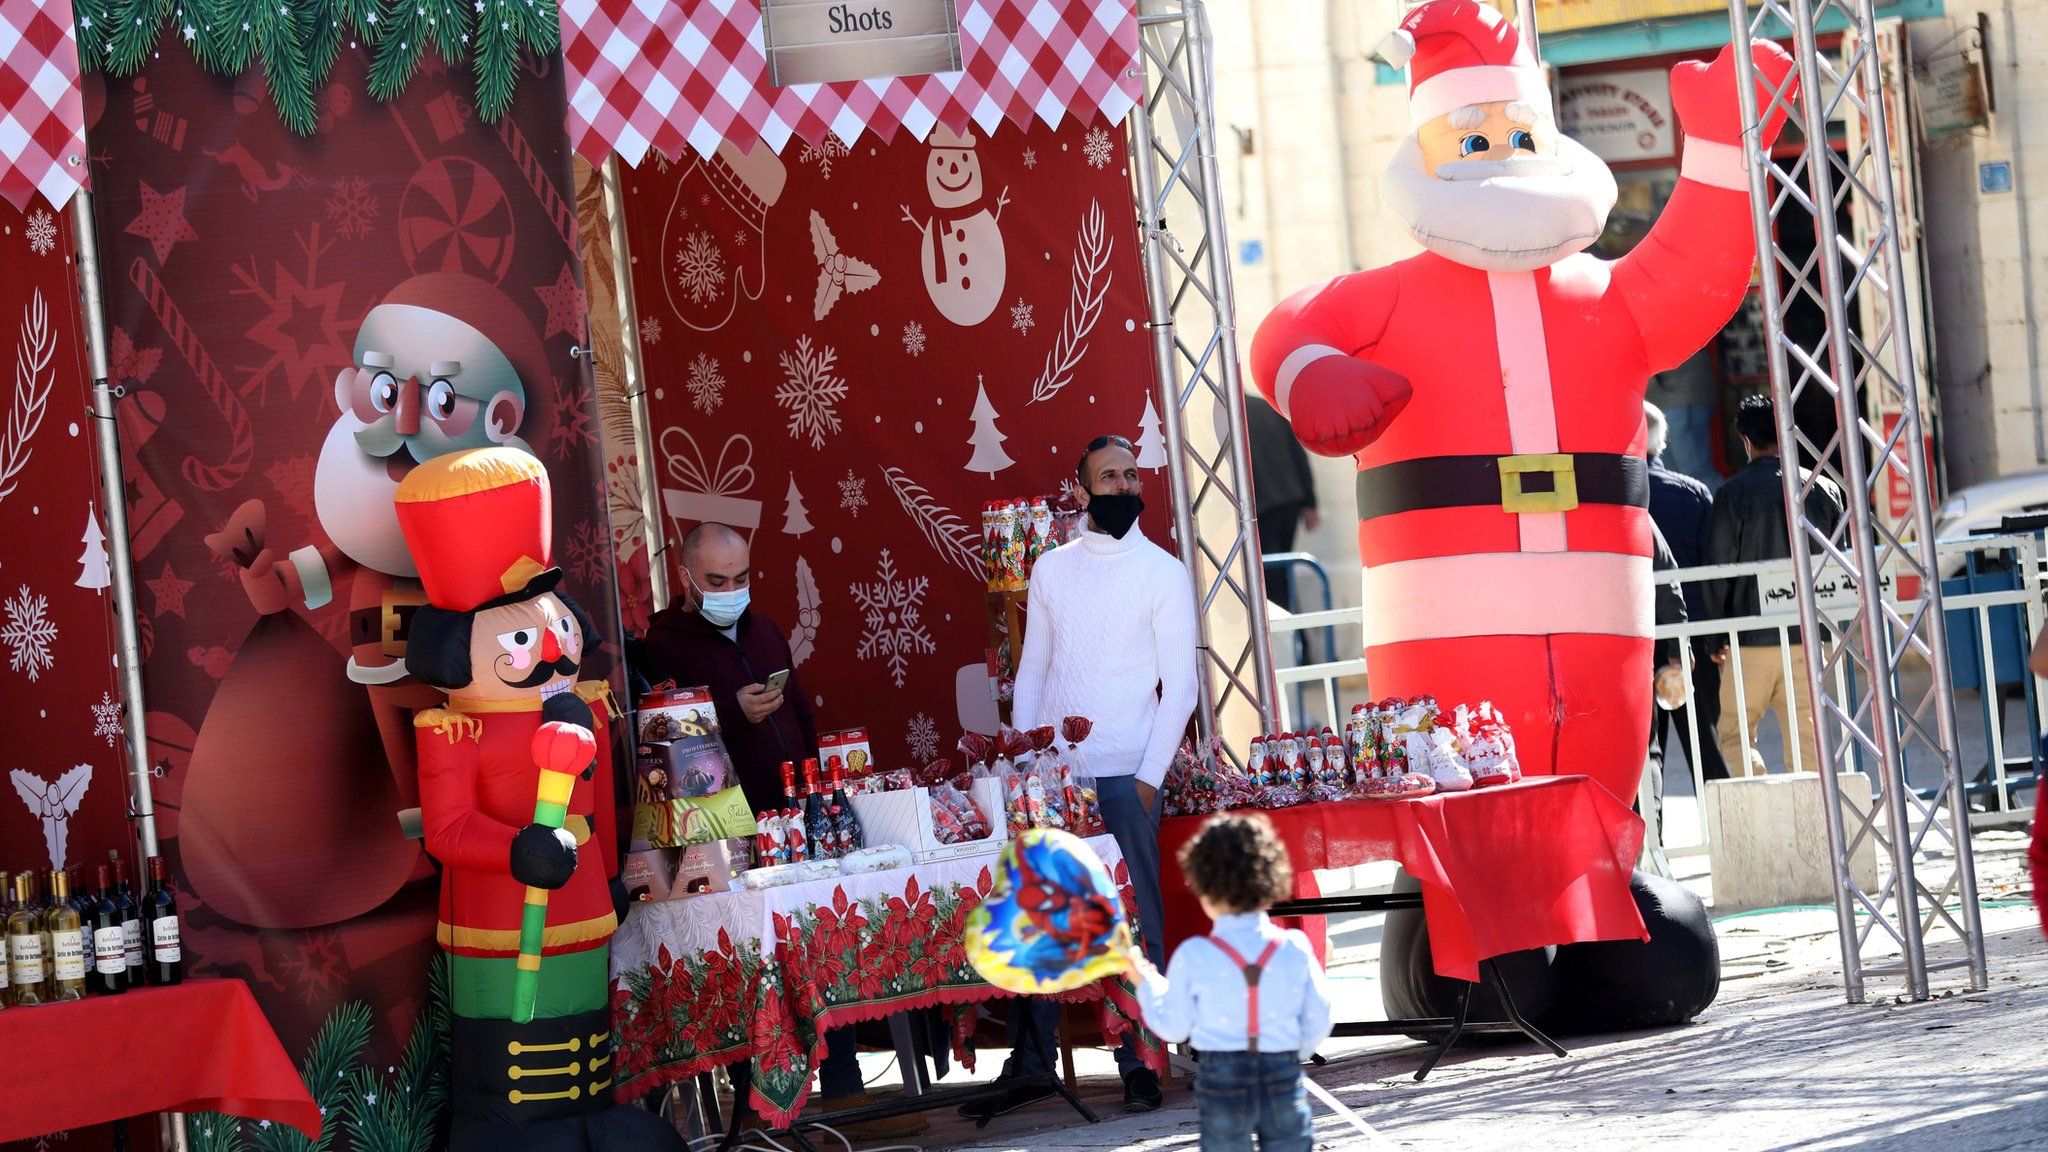 A Christmas market in Manger Square, in Bethlehem, in the occupied West Bank (20 December 2020)